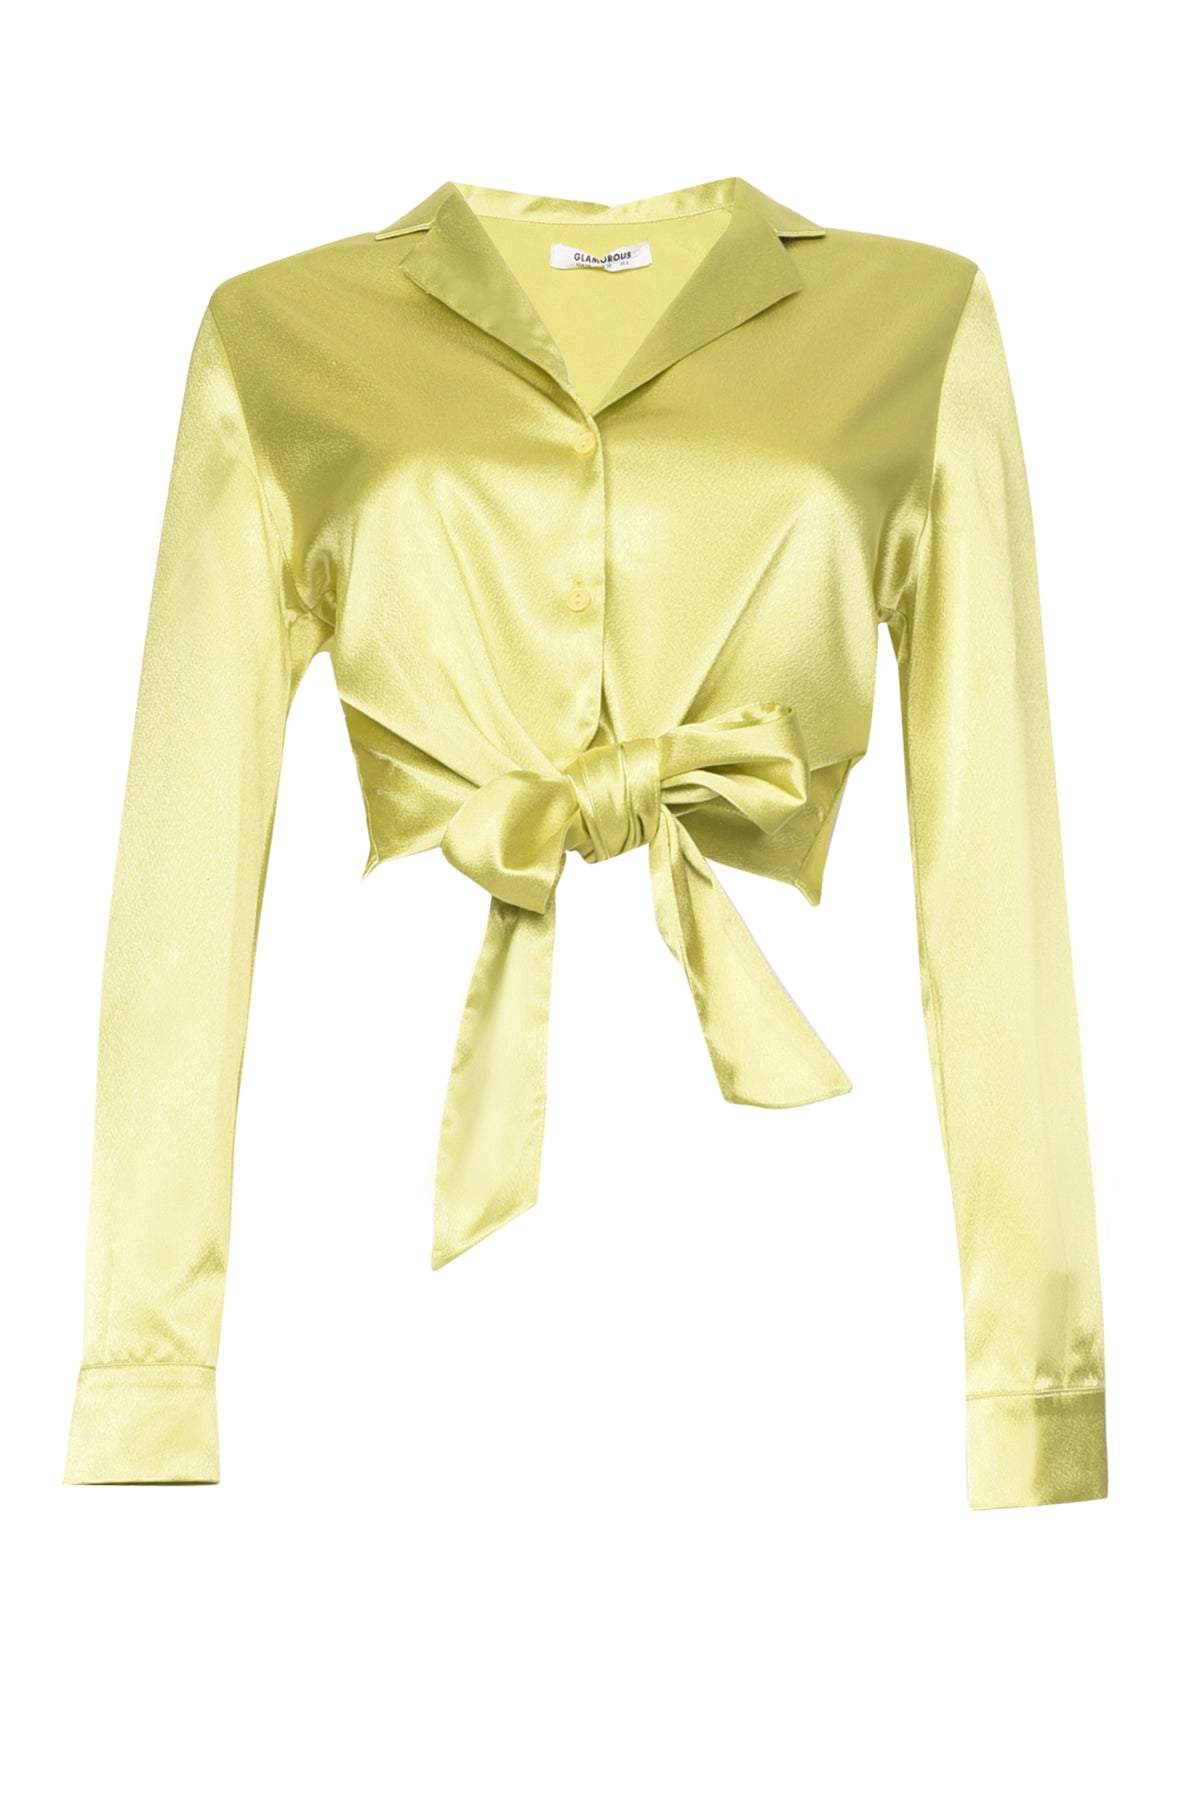 Glamorous Lime Satin Tie Button Front Cropped Shirt